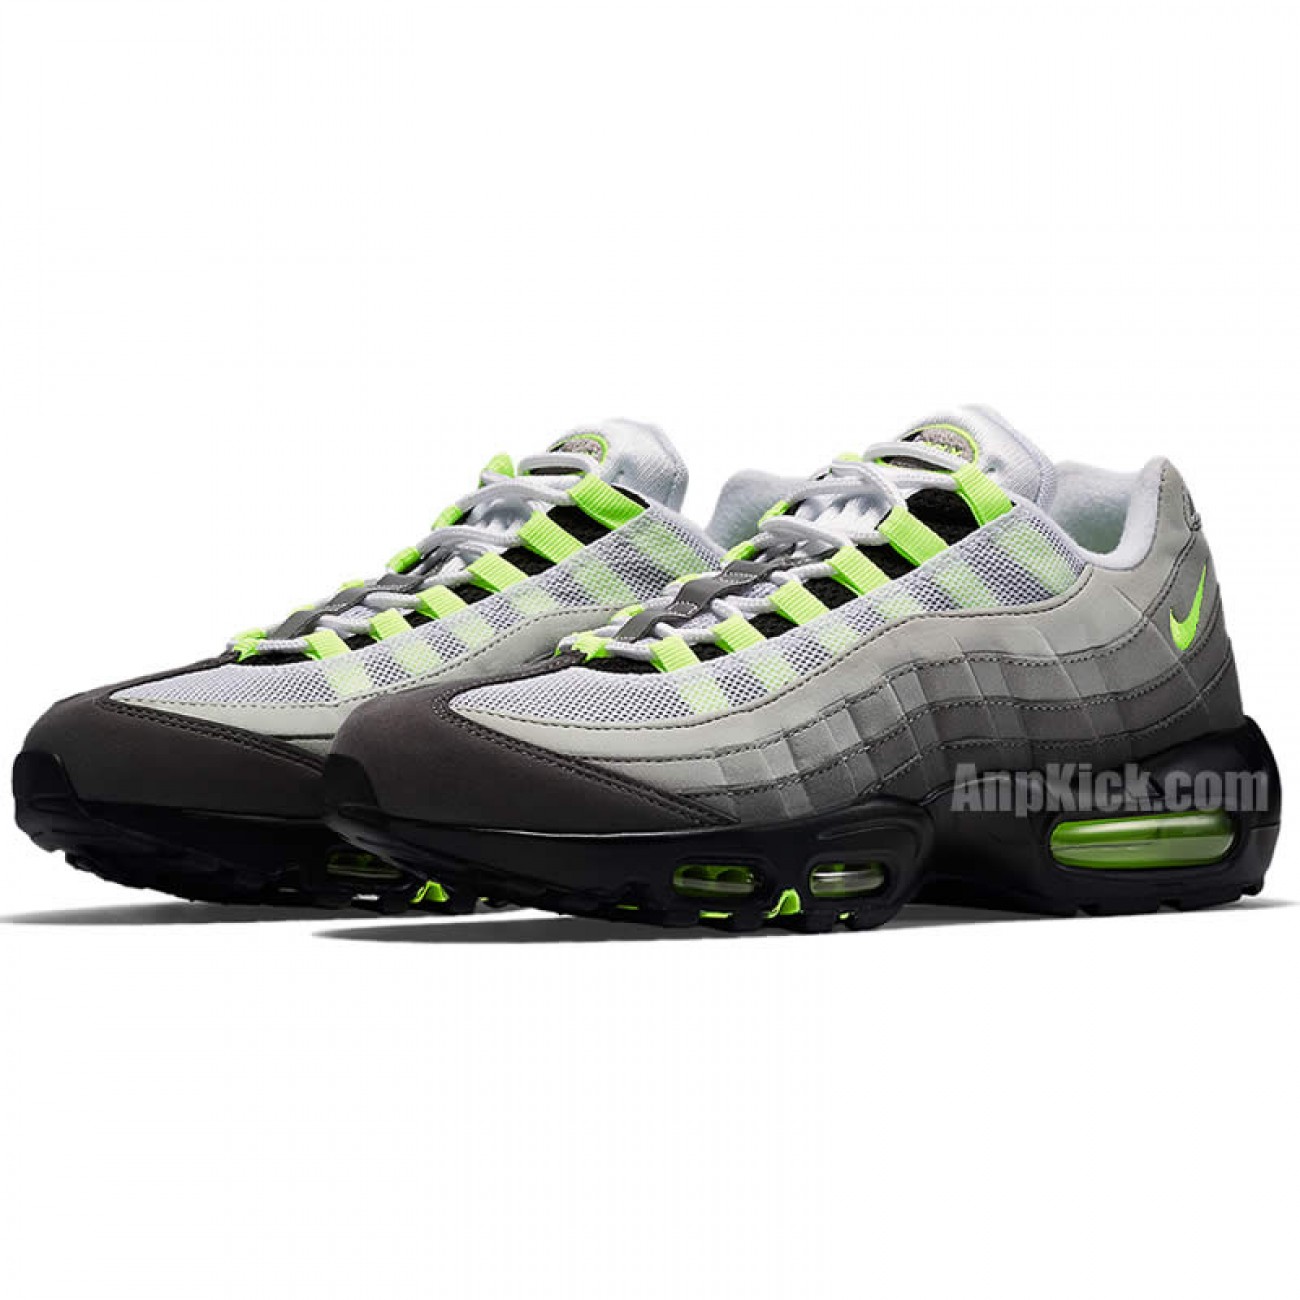 Nike Air Max 95 OG Neon 2018 Green For Sale 554970-071